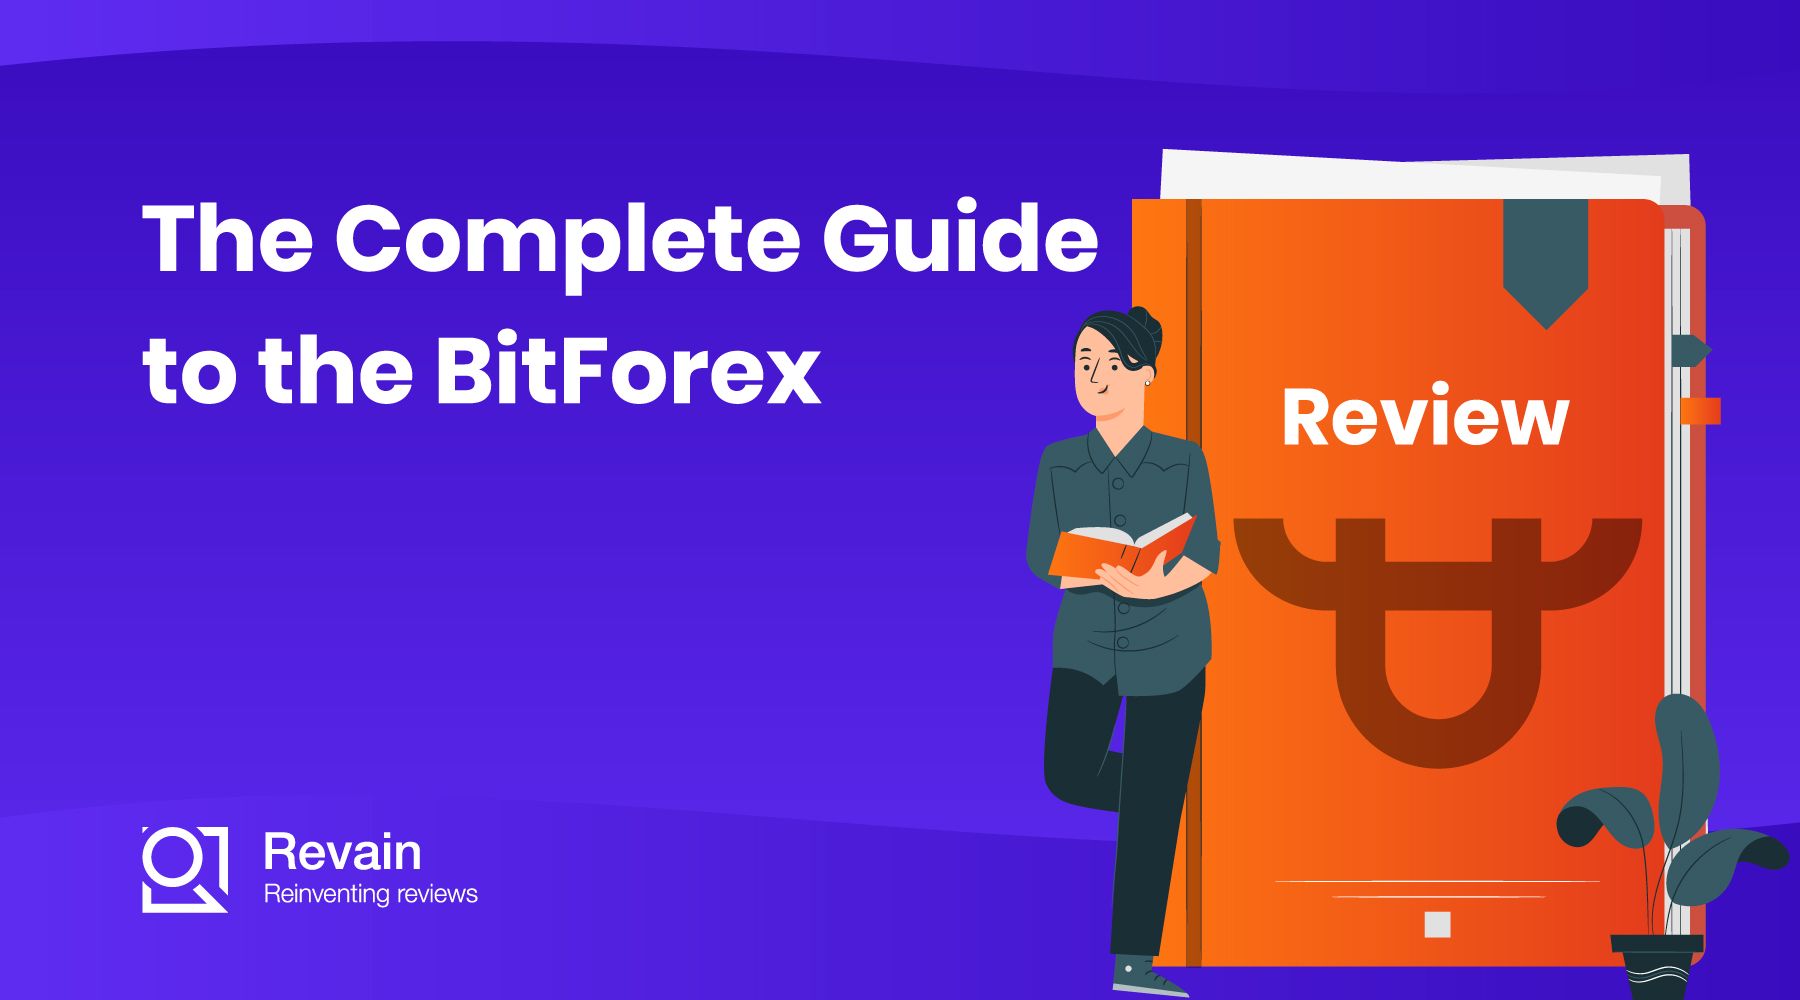 Article The Complete Guide to the BitForex Exchange